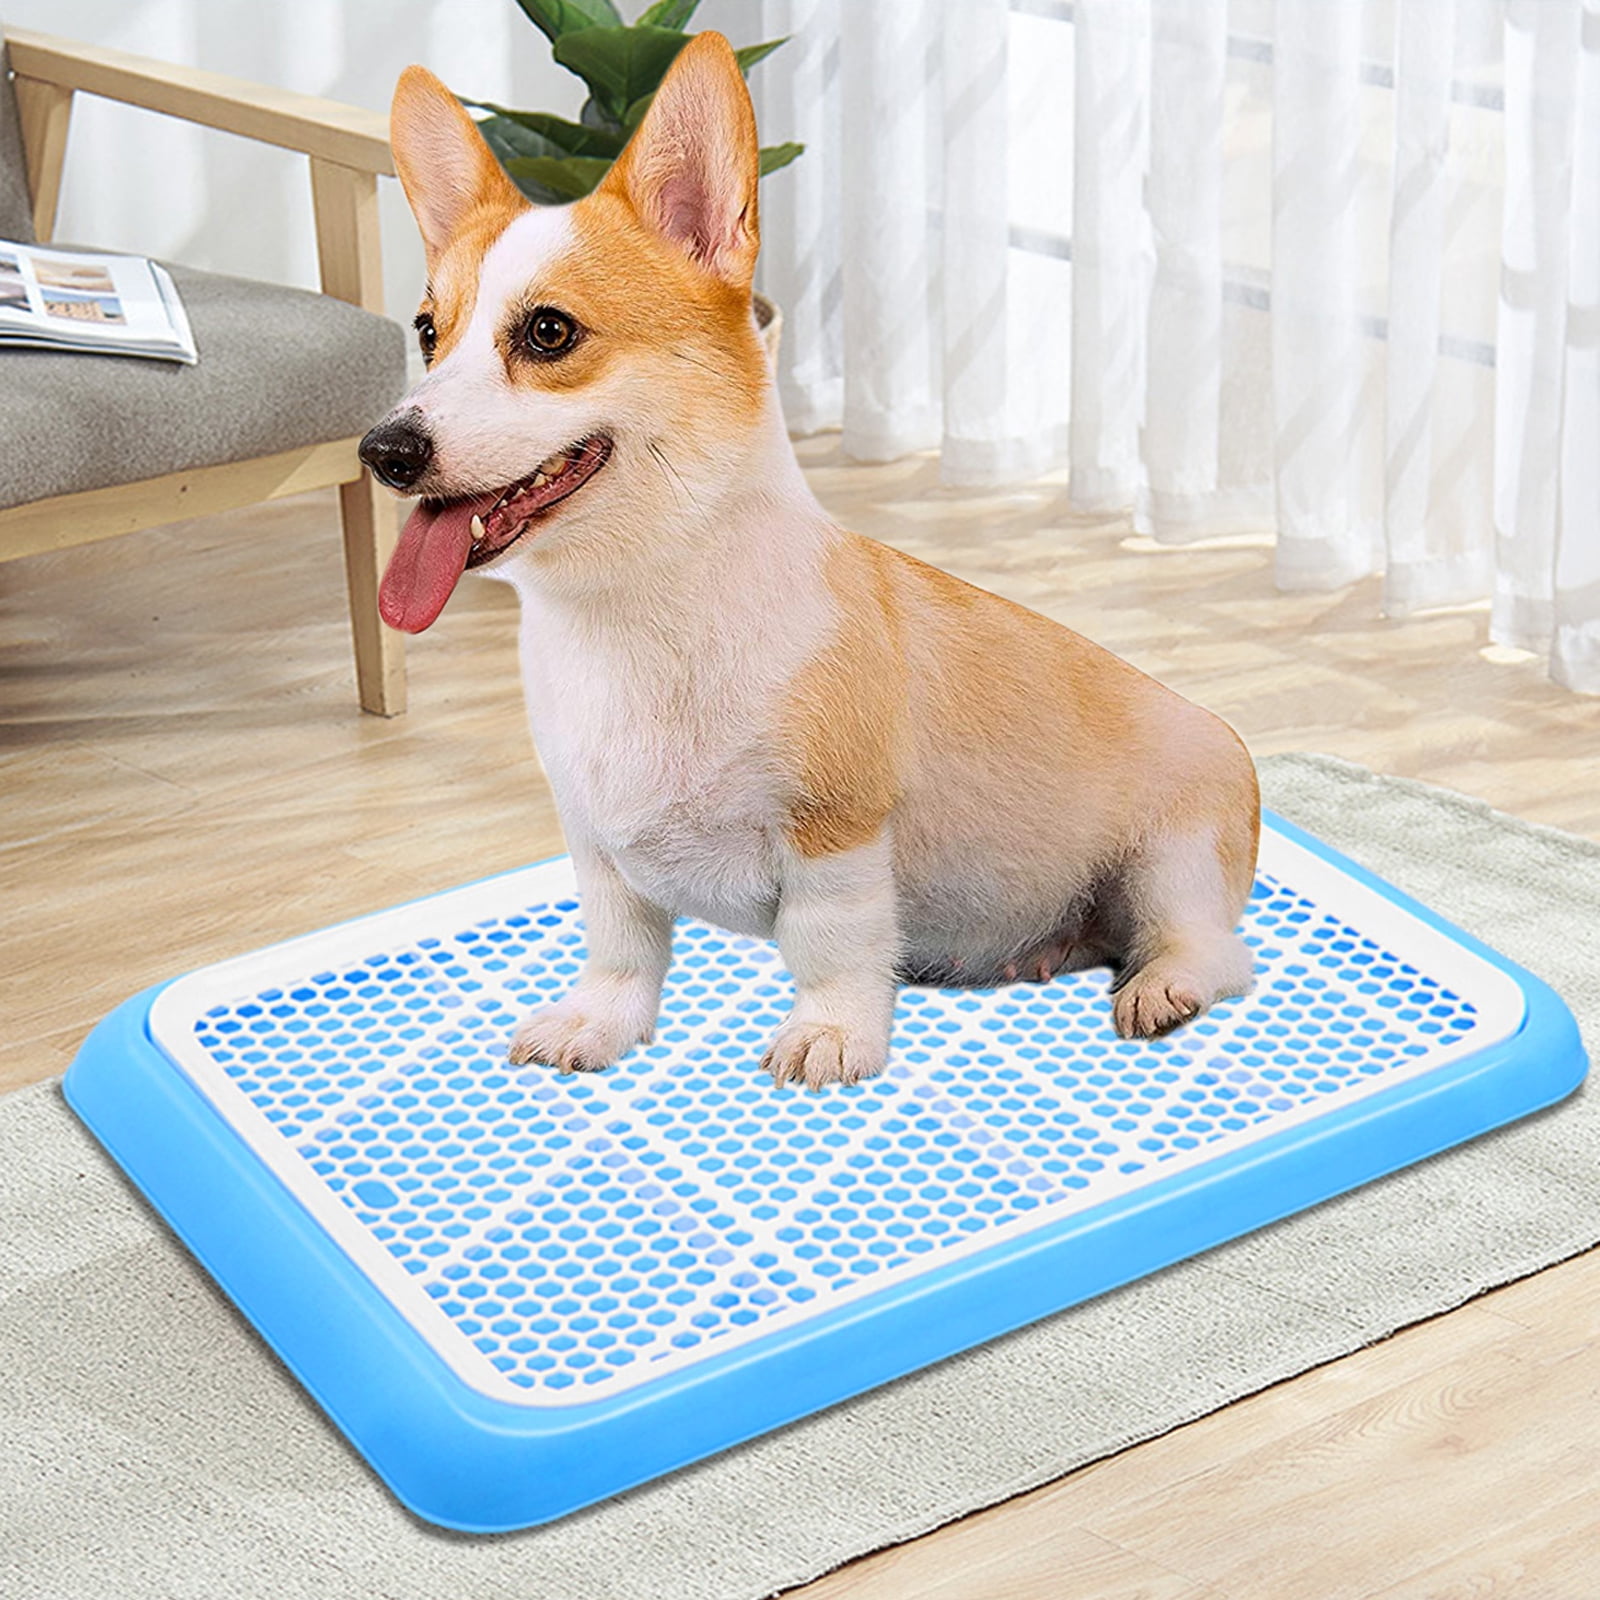 Nubstoer Indoor Training Dog Potty Tray with Pee Post Protection Wall Cover Dog Toilet Blue